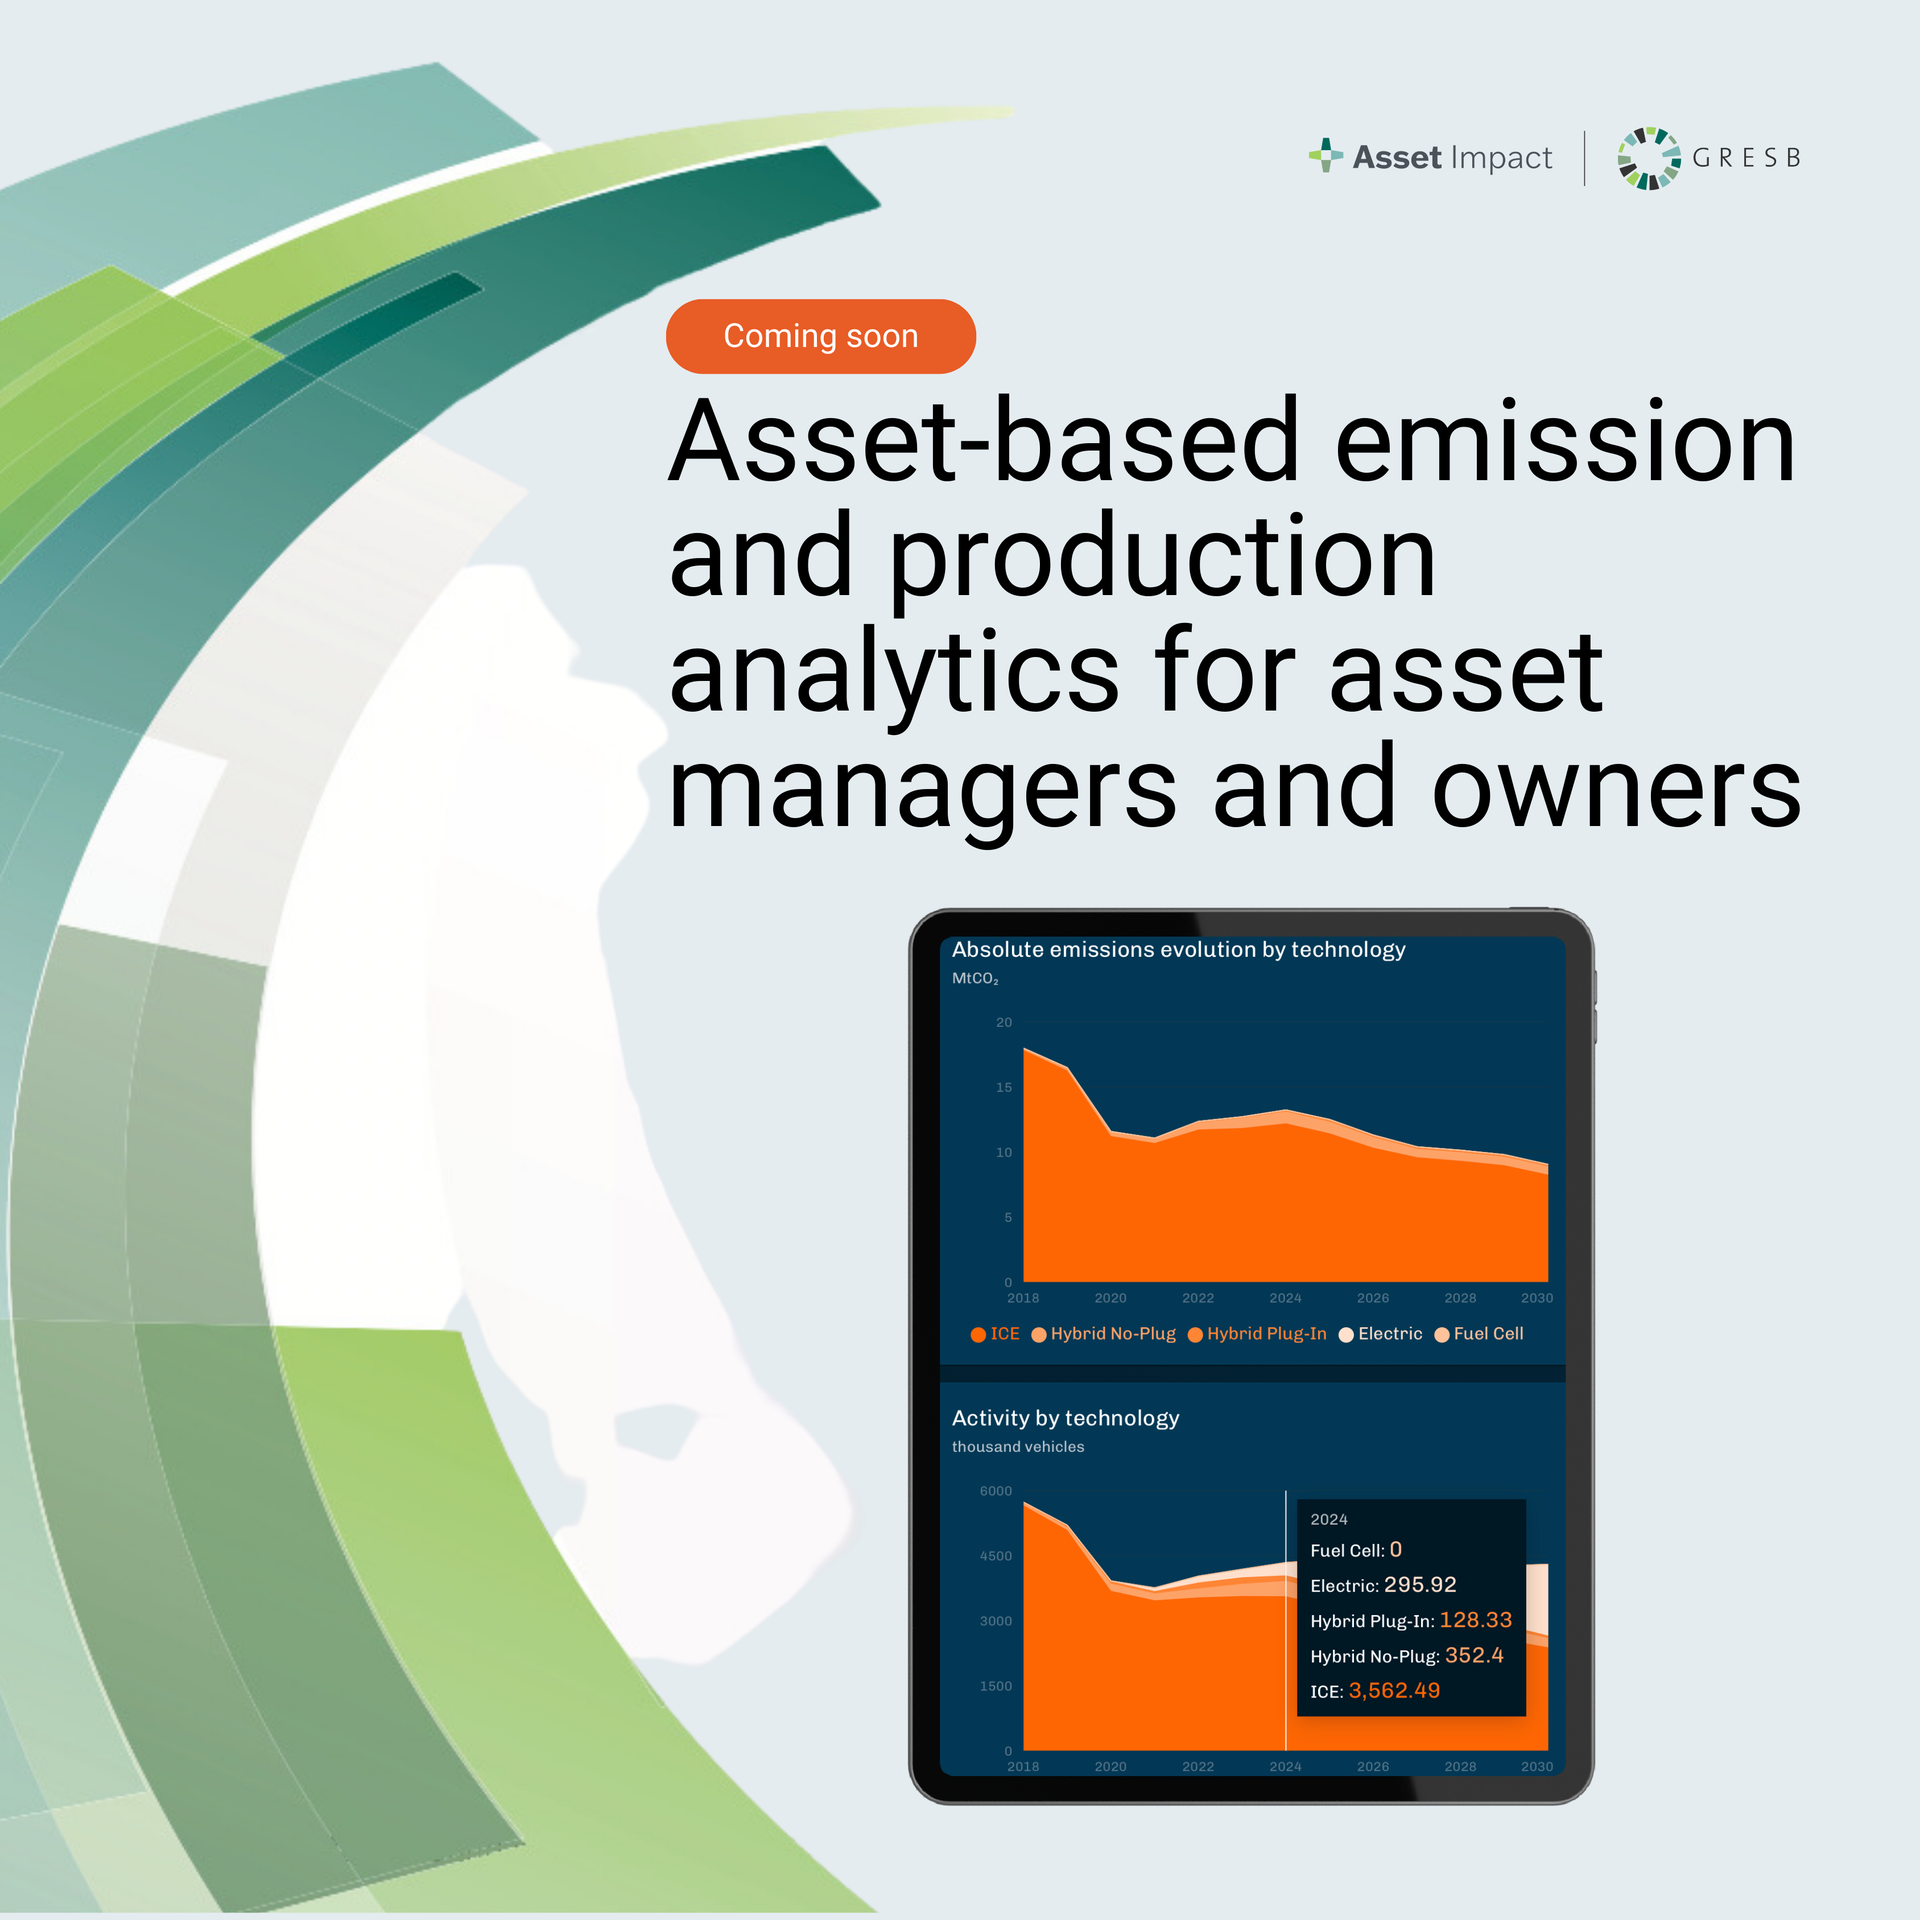 Asset-based emission and production analytics for asset managers and owners